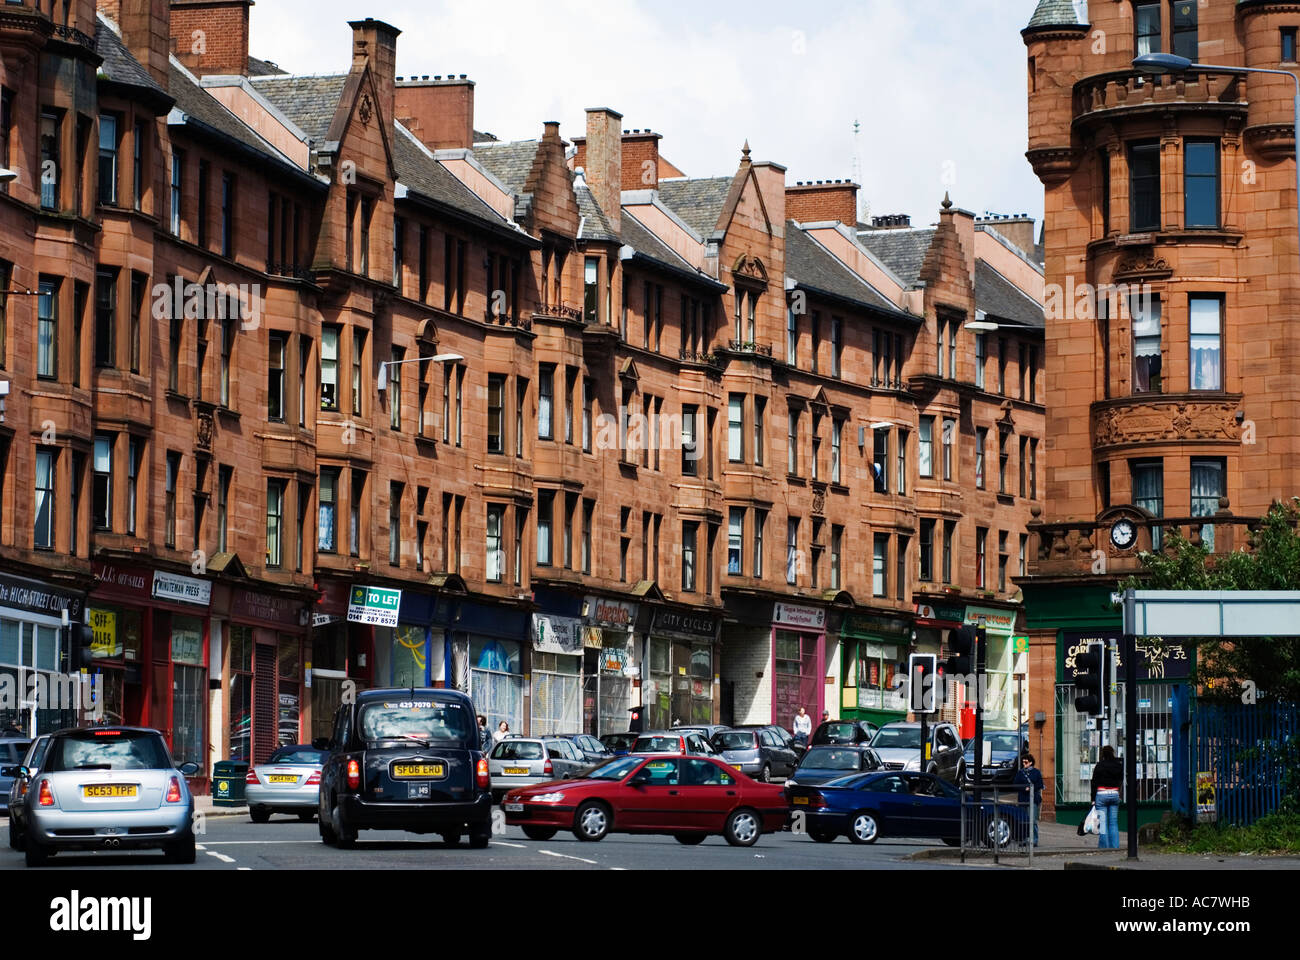 Typical old red sandstone built tenement housing in historic High Street in East End of Glasgow Scotland Stock Photo